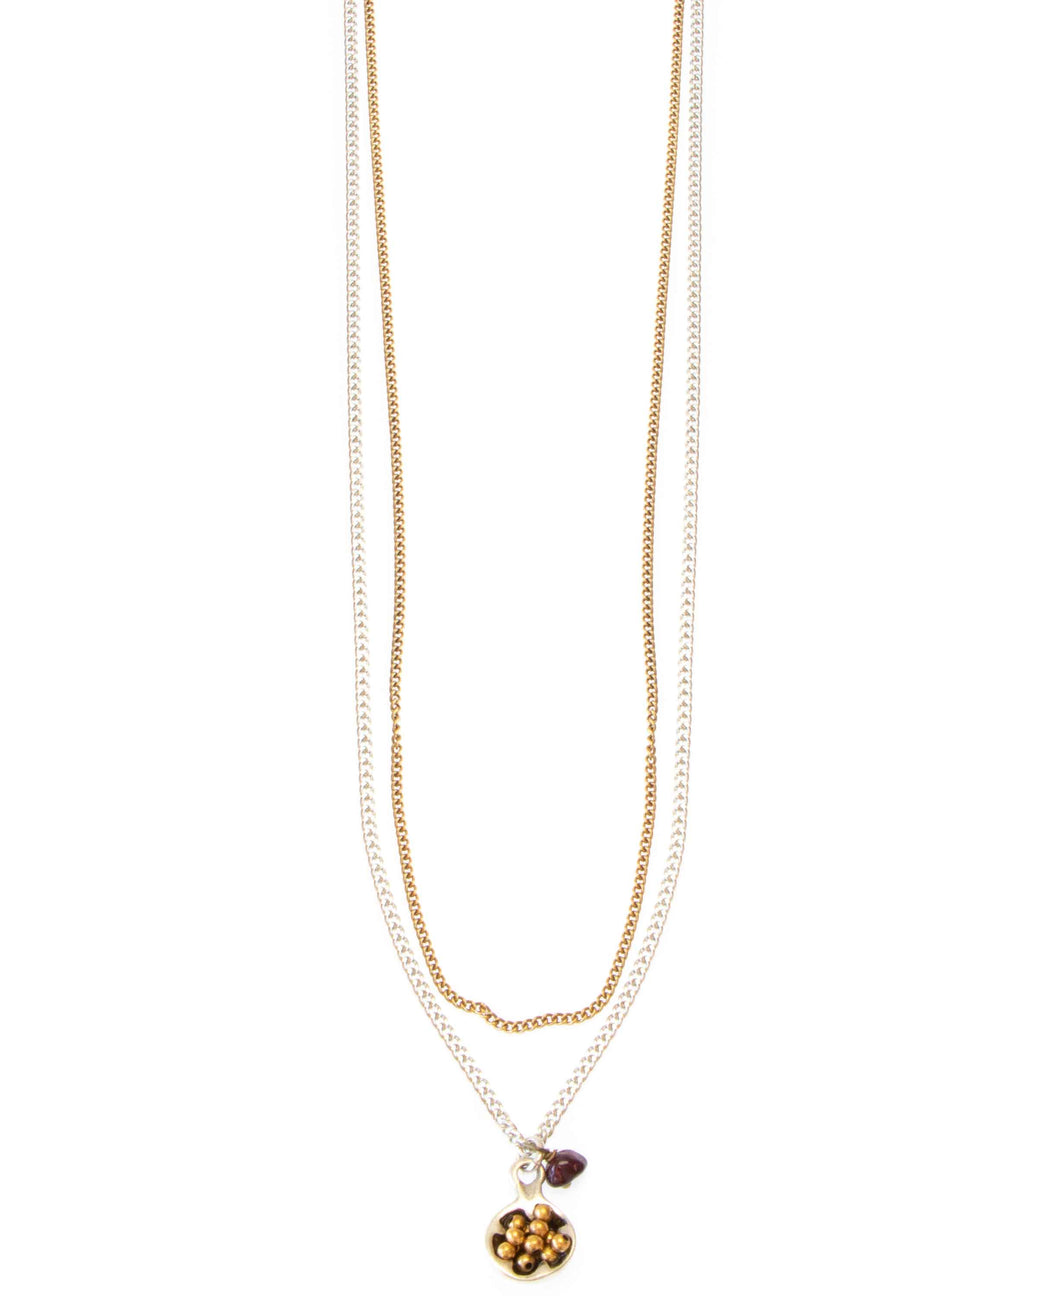 Hultquist Single Pomegranate Necklace